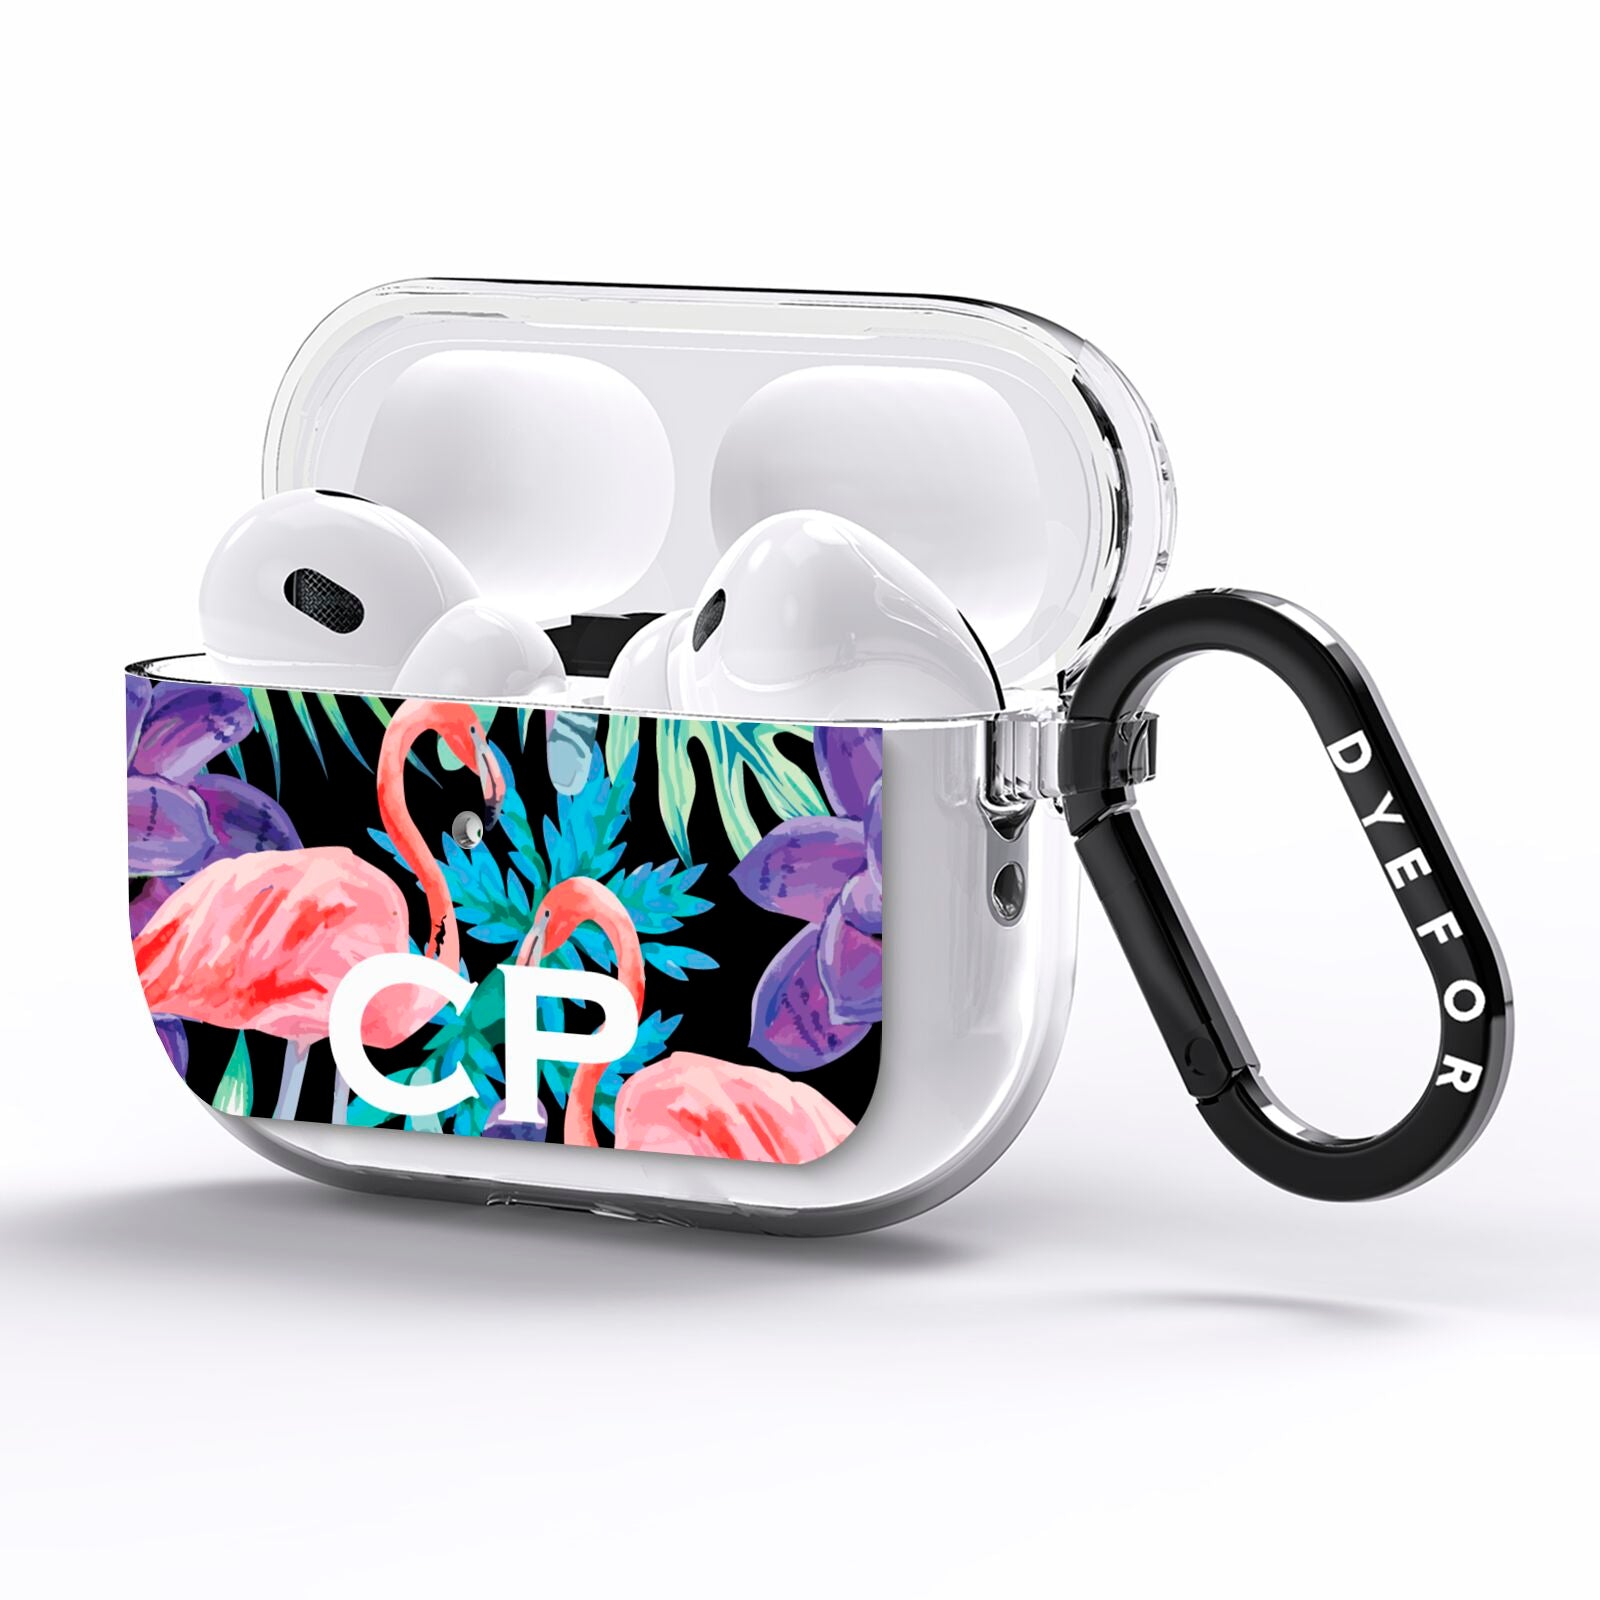 Personalised Initials Flamingos 4 AirPods Pro Clear Case Side Image